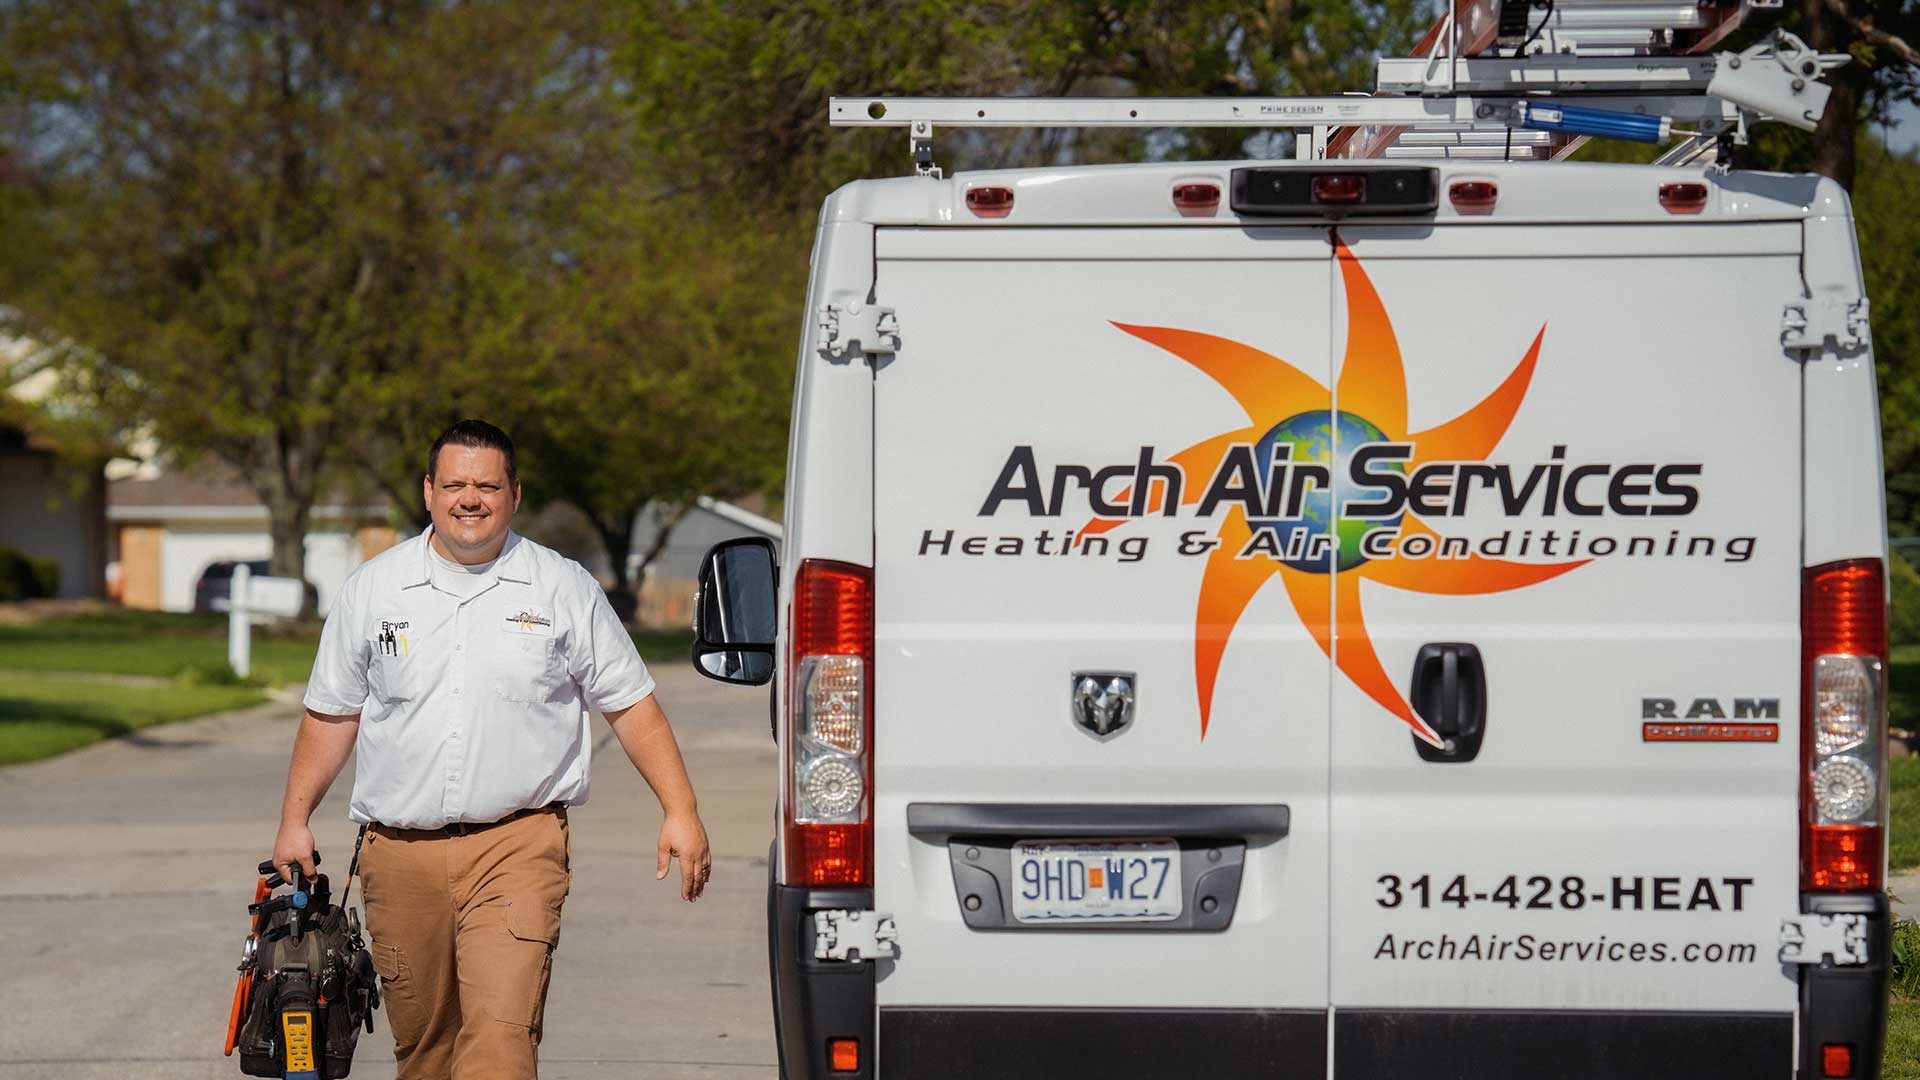 arch air service technician walking next to company truck